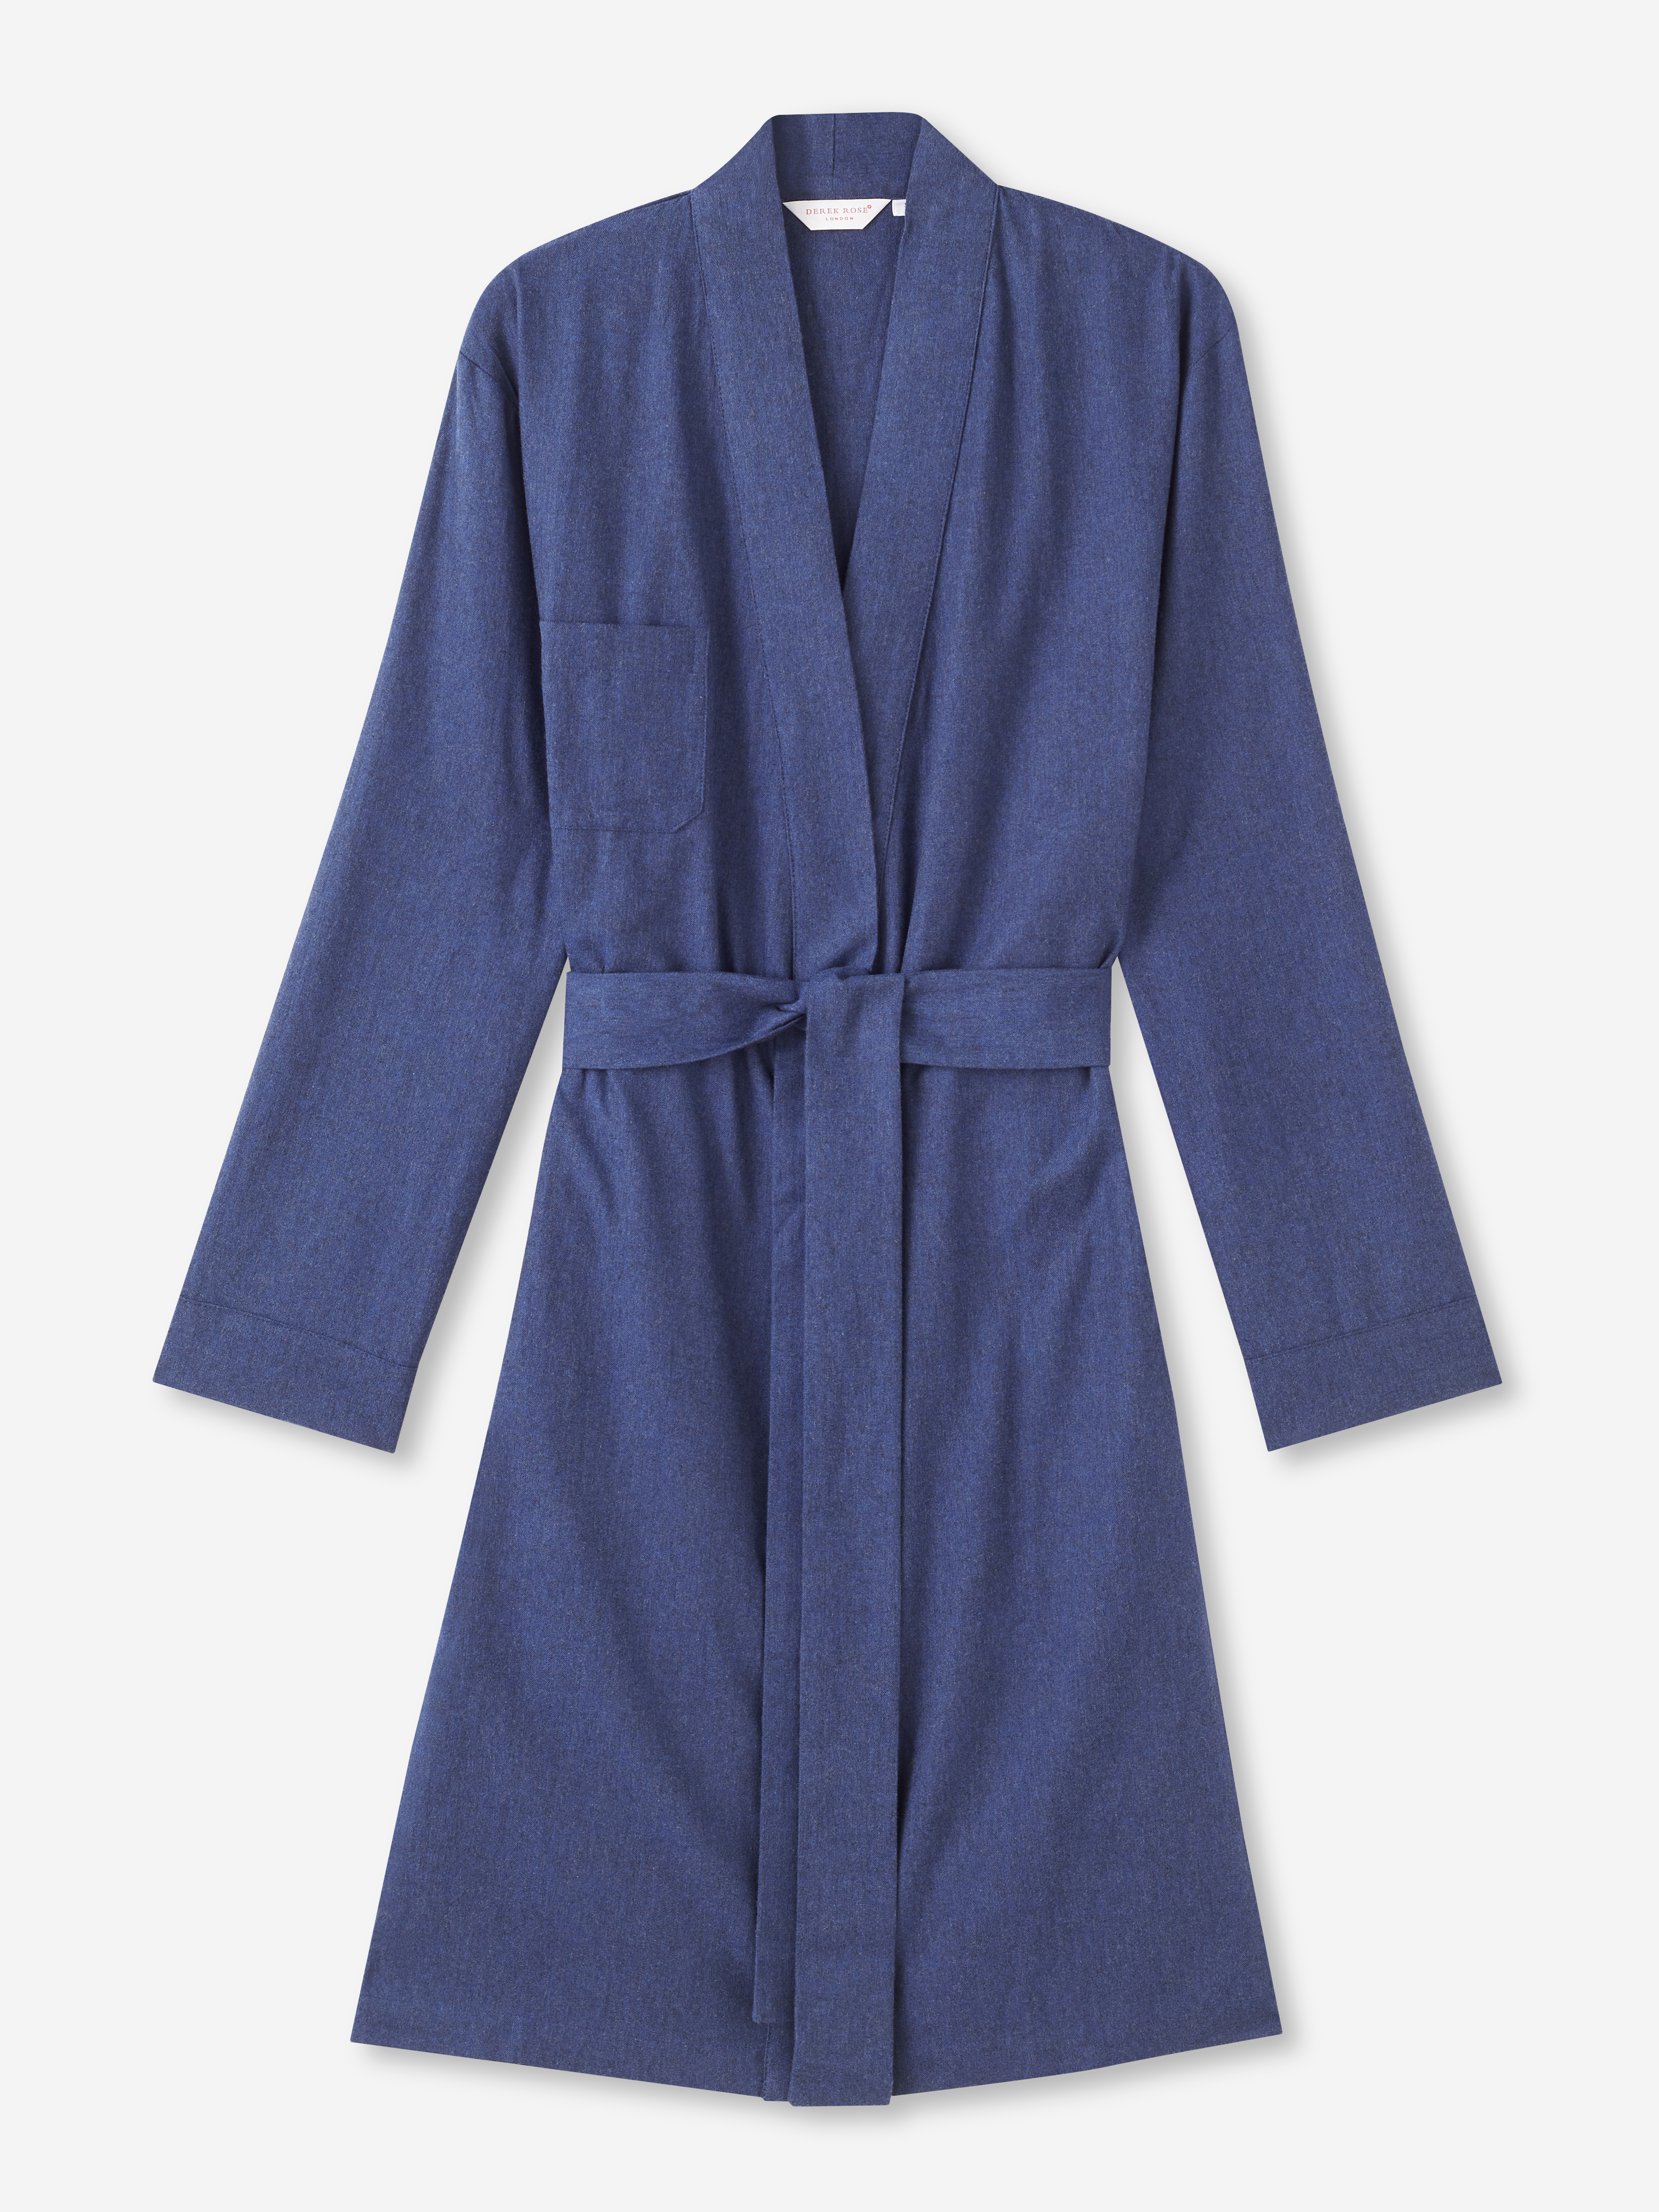 Shop Joules Womens Dressing Gowns up to 70% Off | DealDoodle